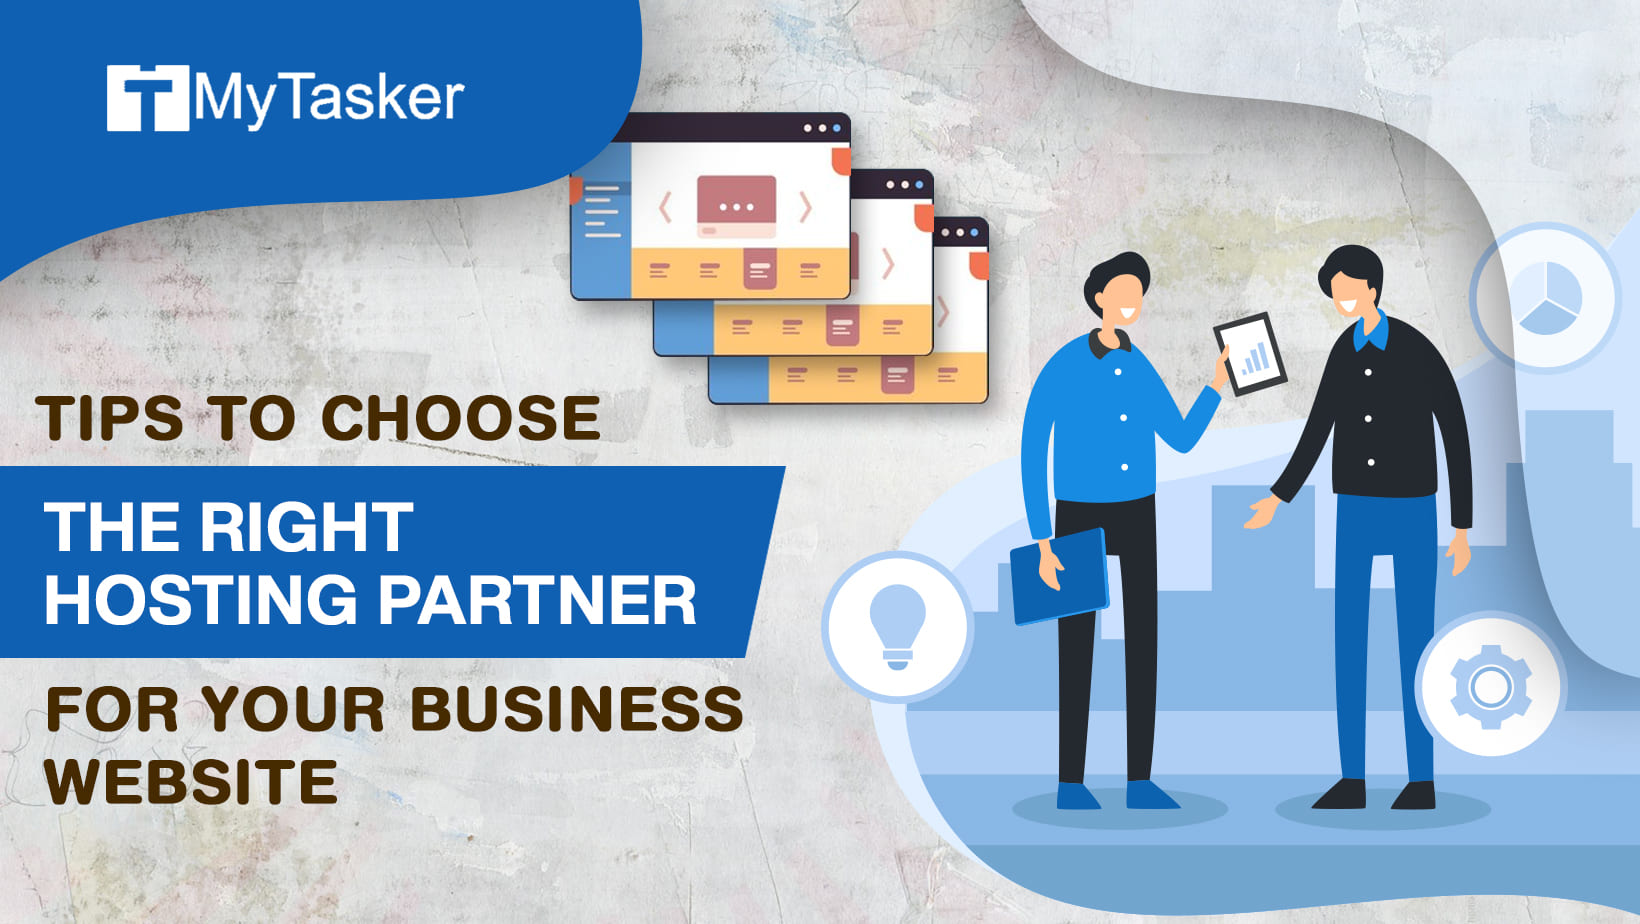 Tips To Choose the Right Hosting Partner For Your Business Website